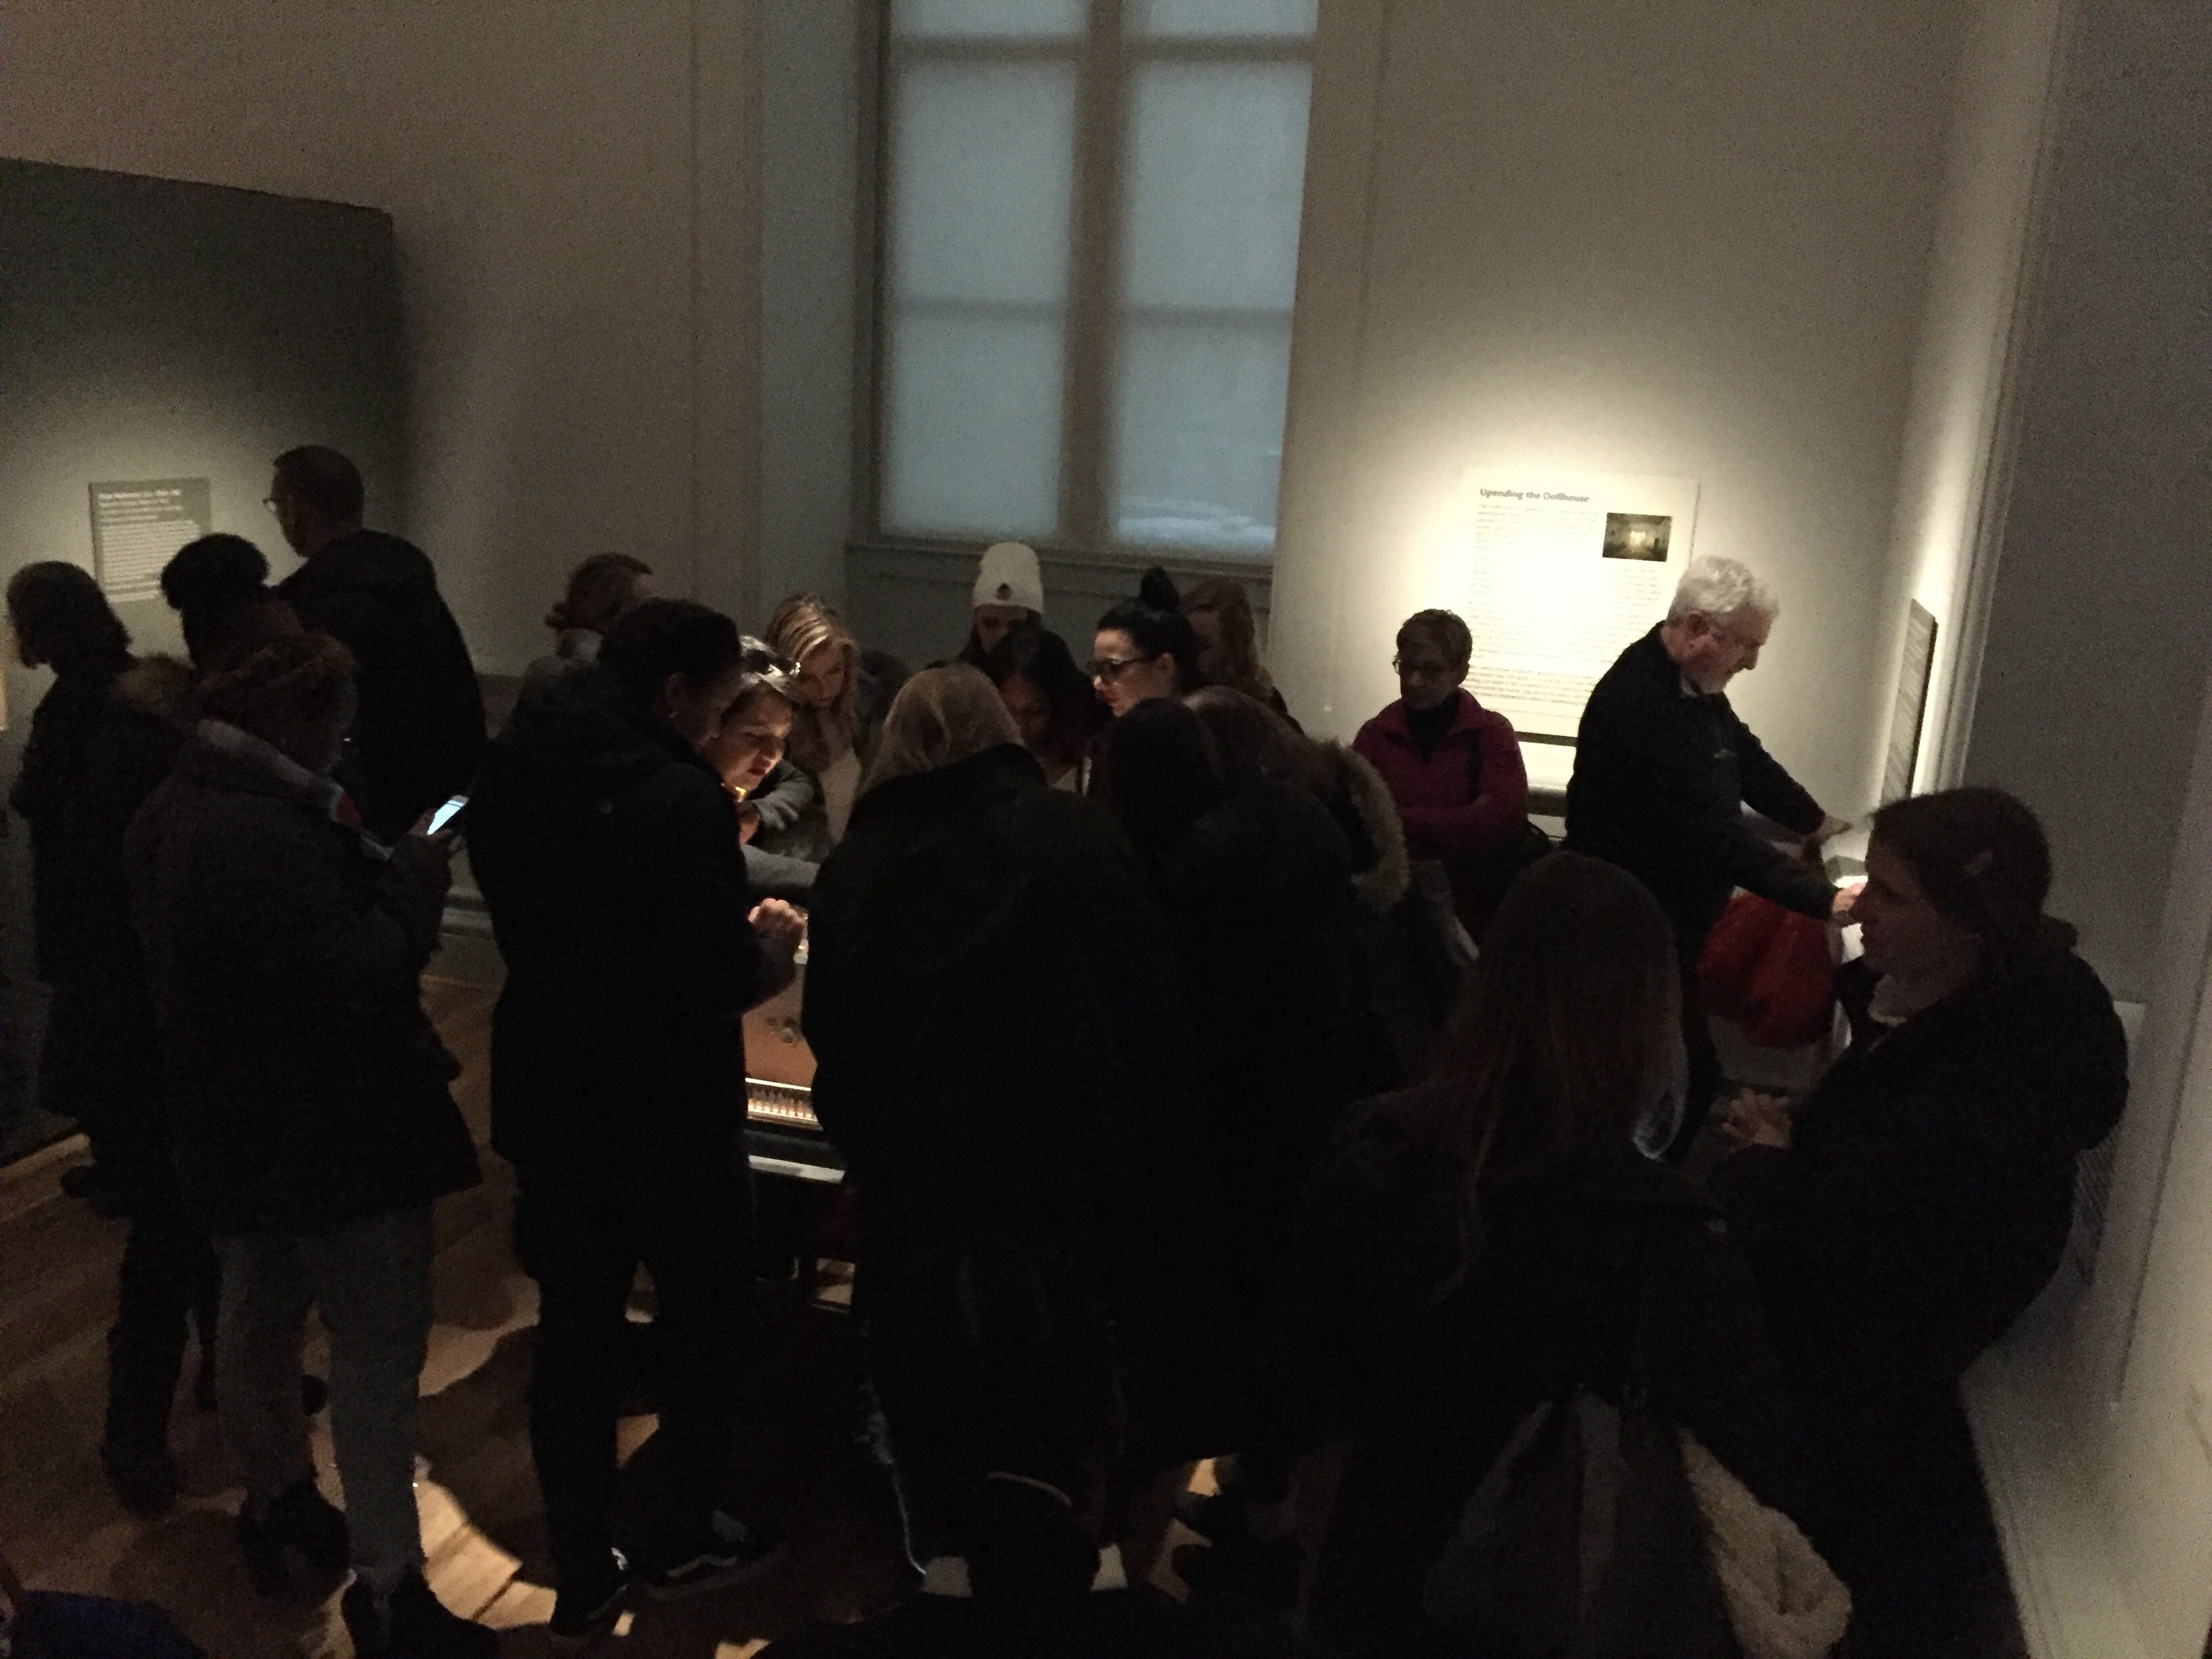 A group of strangers at the Renwick Gallery puzzling out one of Lee's forensic "nutshell" studies, Dec. 9, 2017